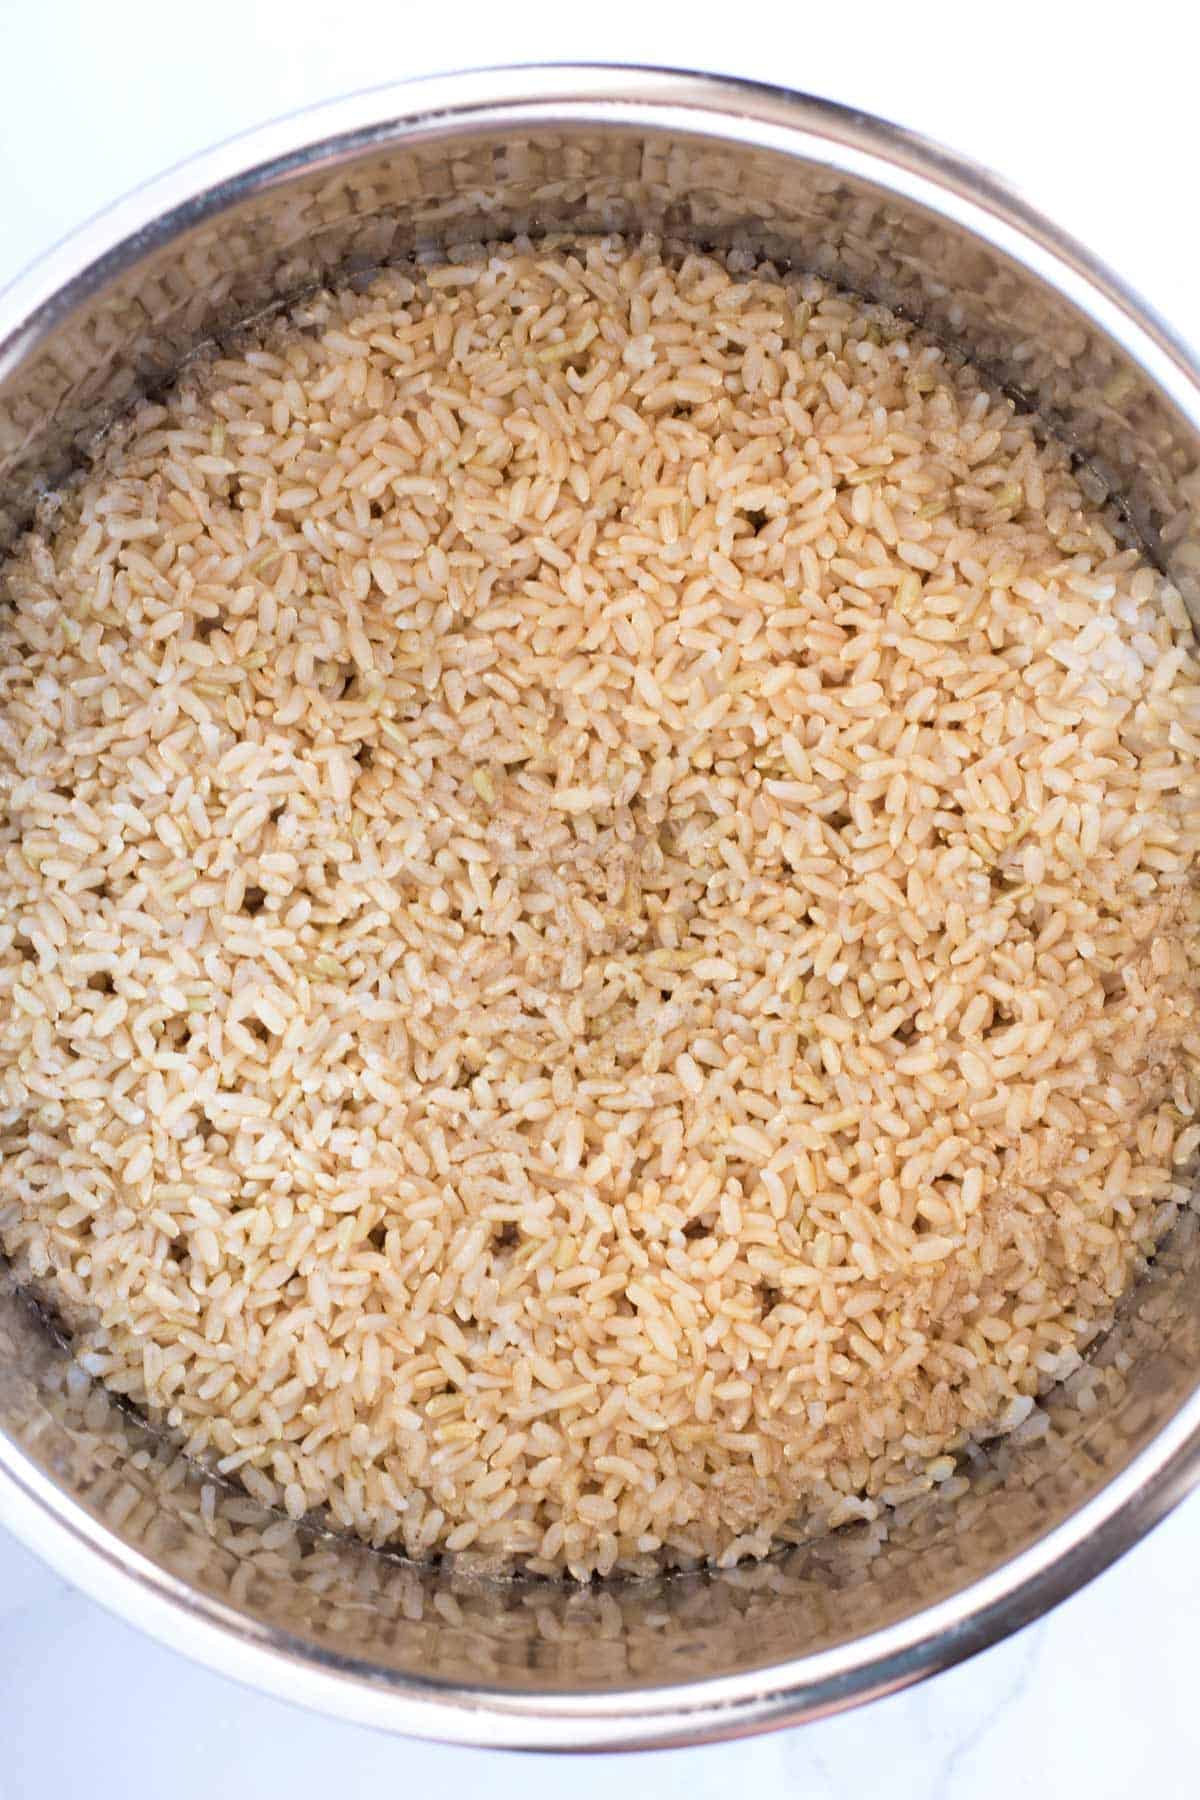 Finished cooked brown rice in a pot.